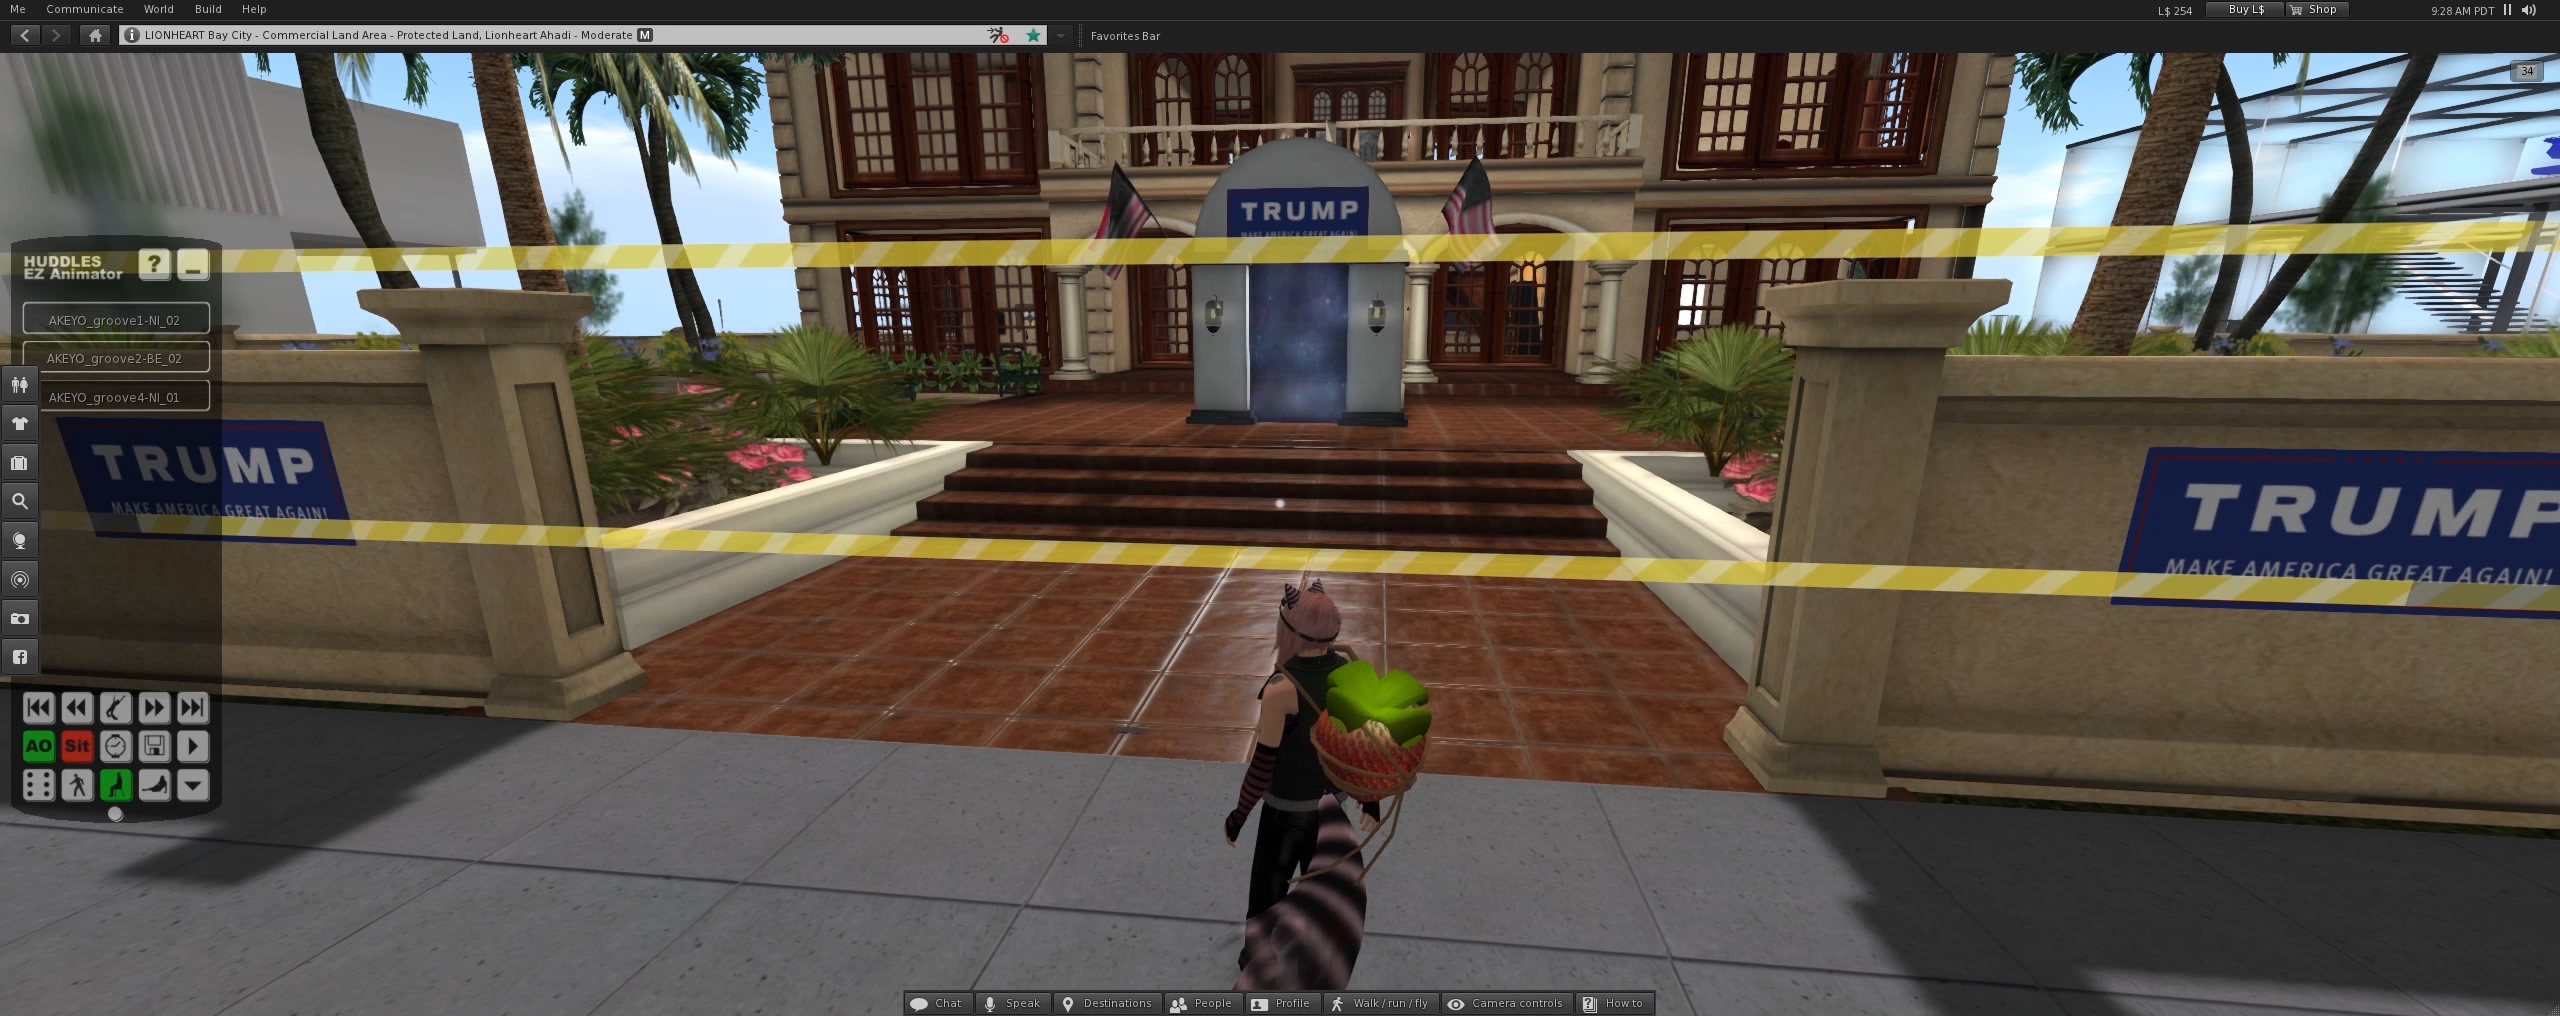 And Then I Got Banned From Donald Trump’s Second Life Mansion